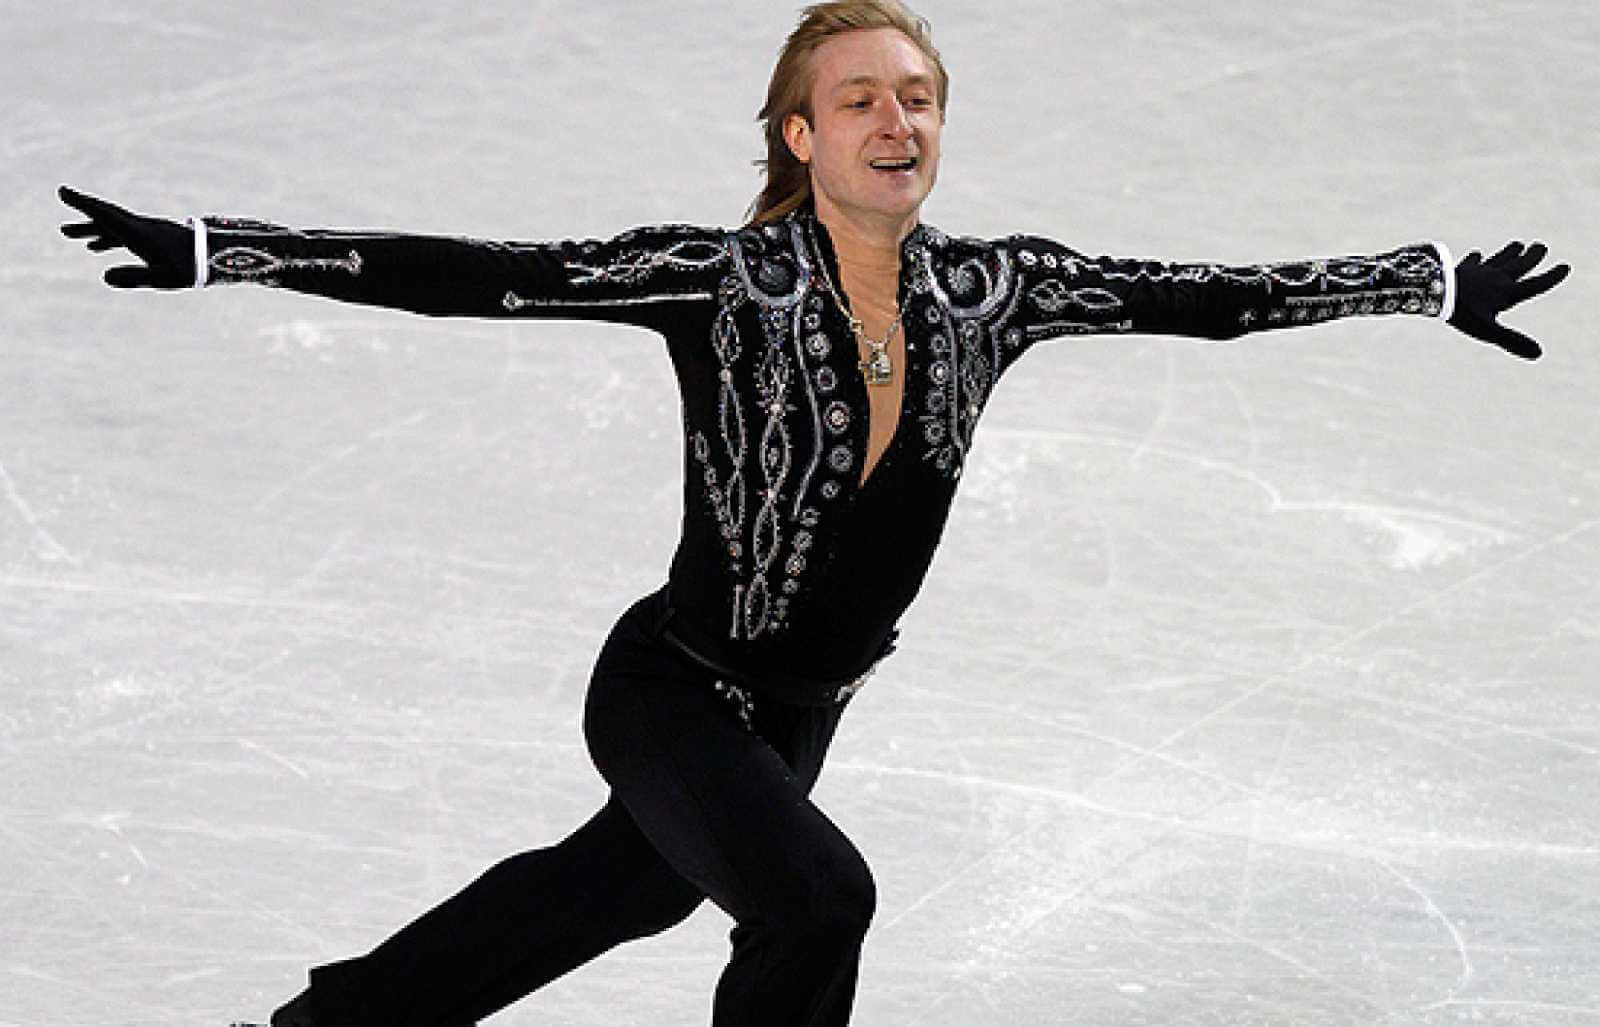 Yevgueni Plushenko, one of the top Russian athletes, competes in ice skating.